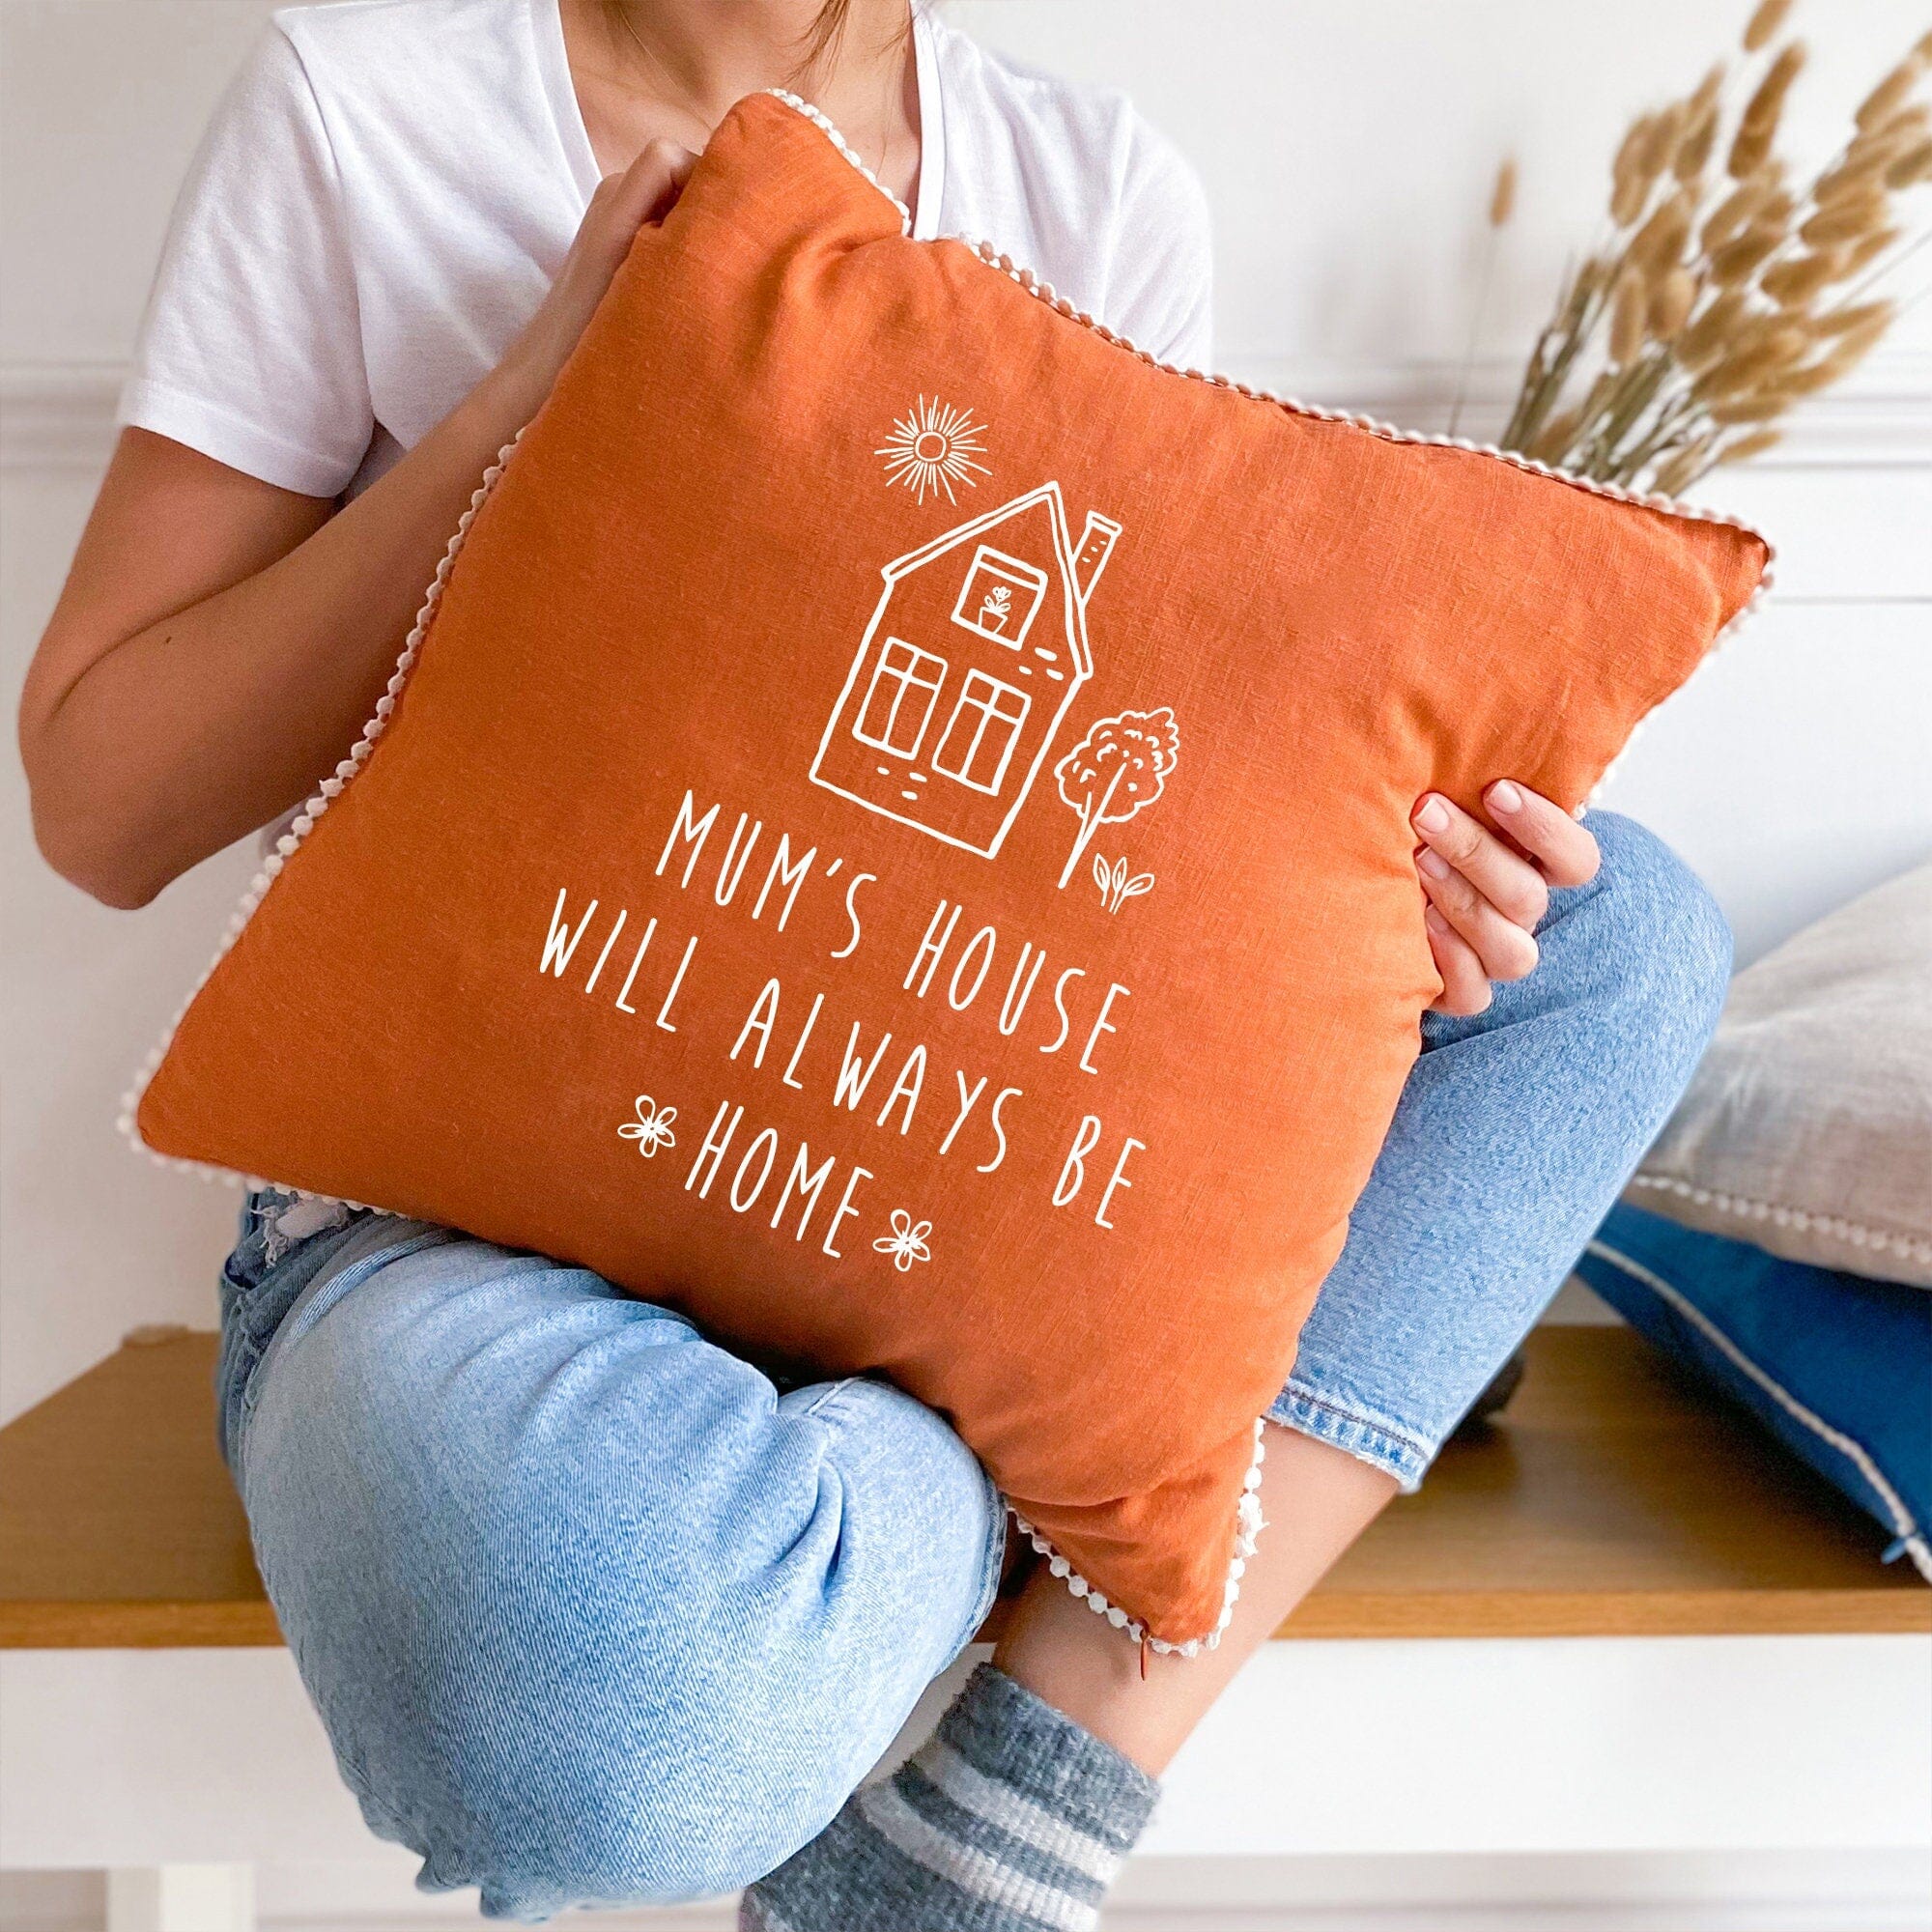 Mum's house will always be home linen cushion with mini flower trim, Mother's Day gift for mummy